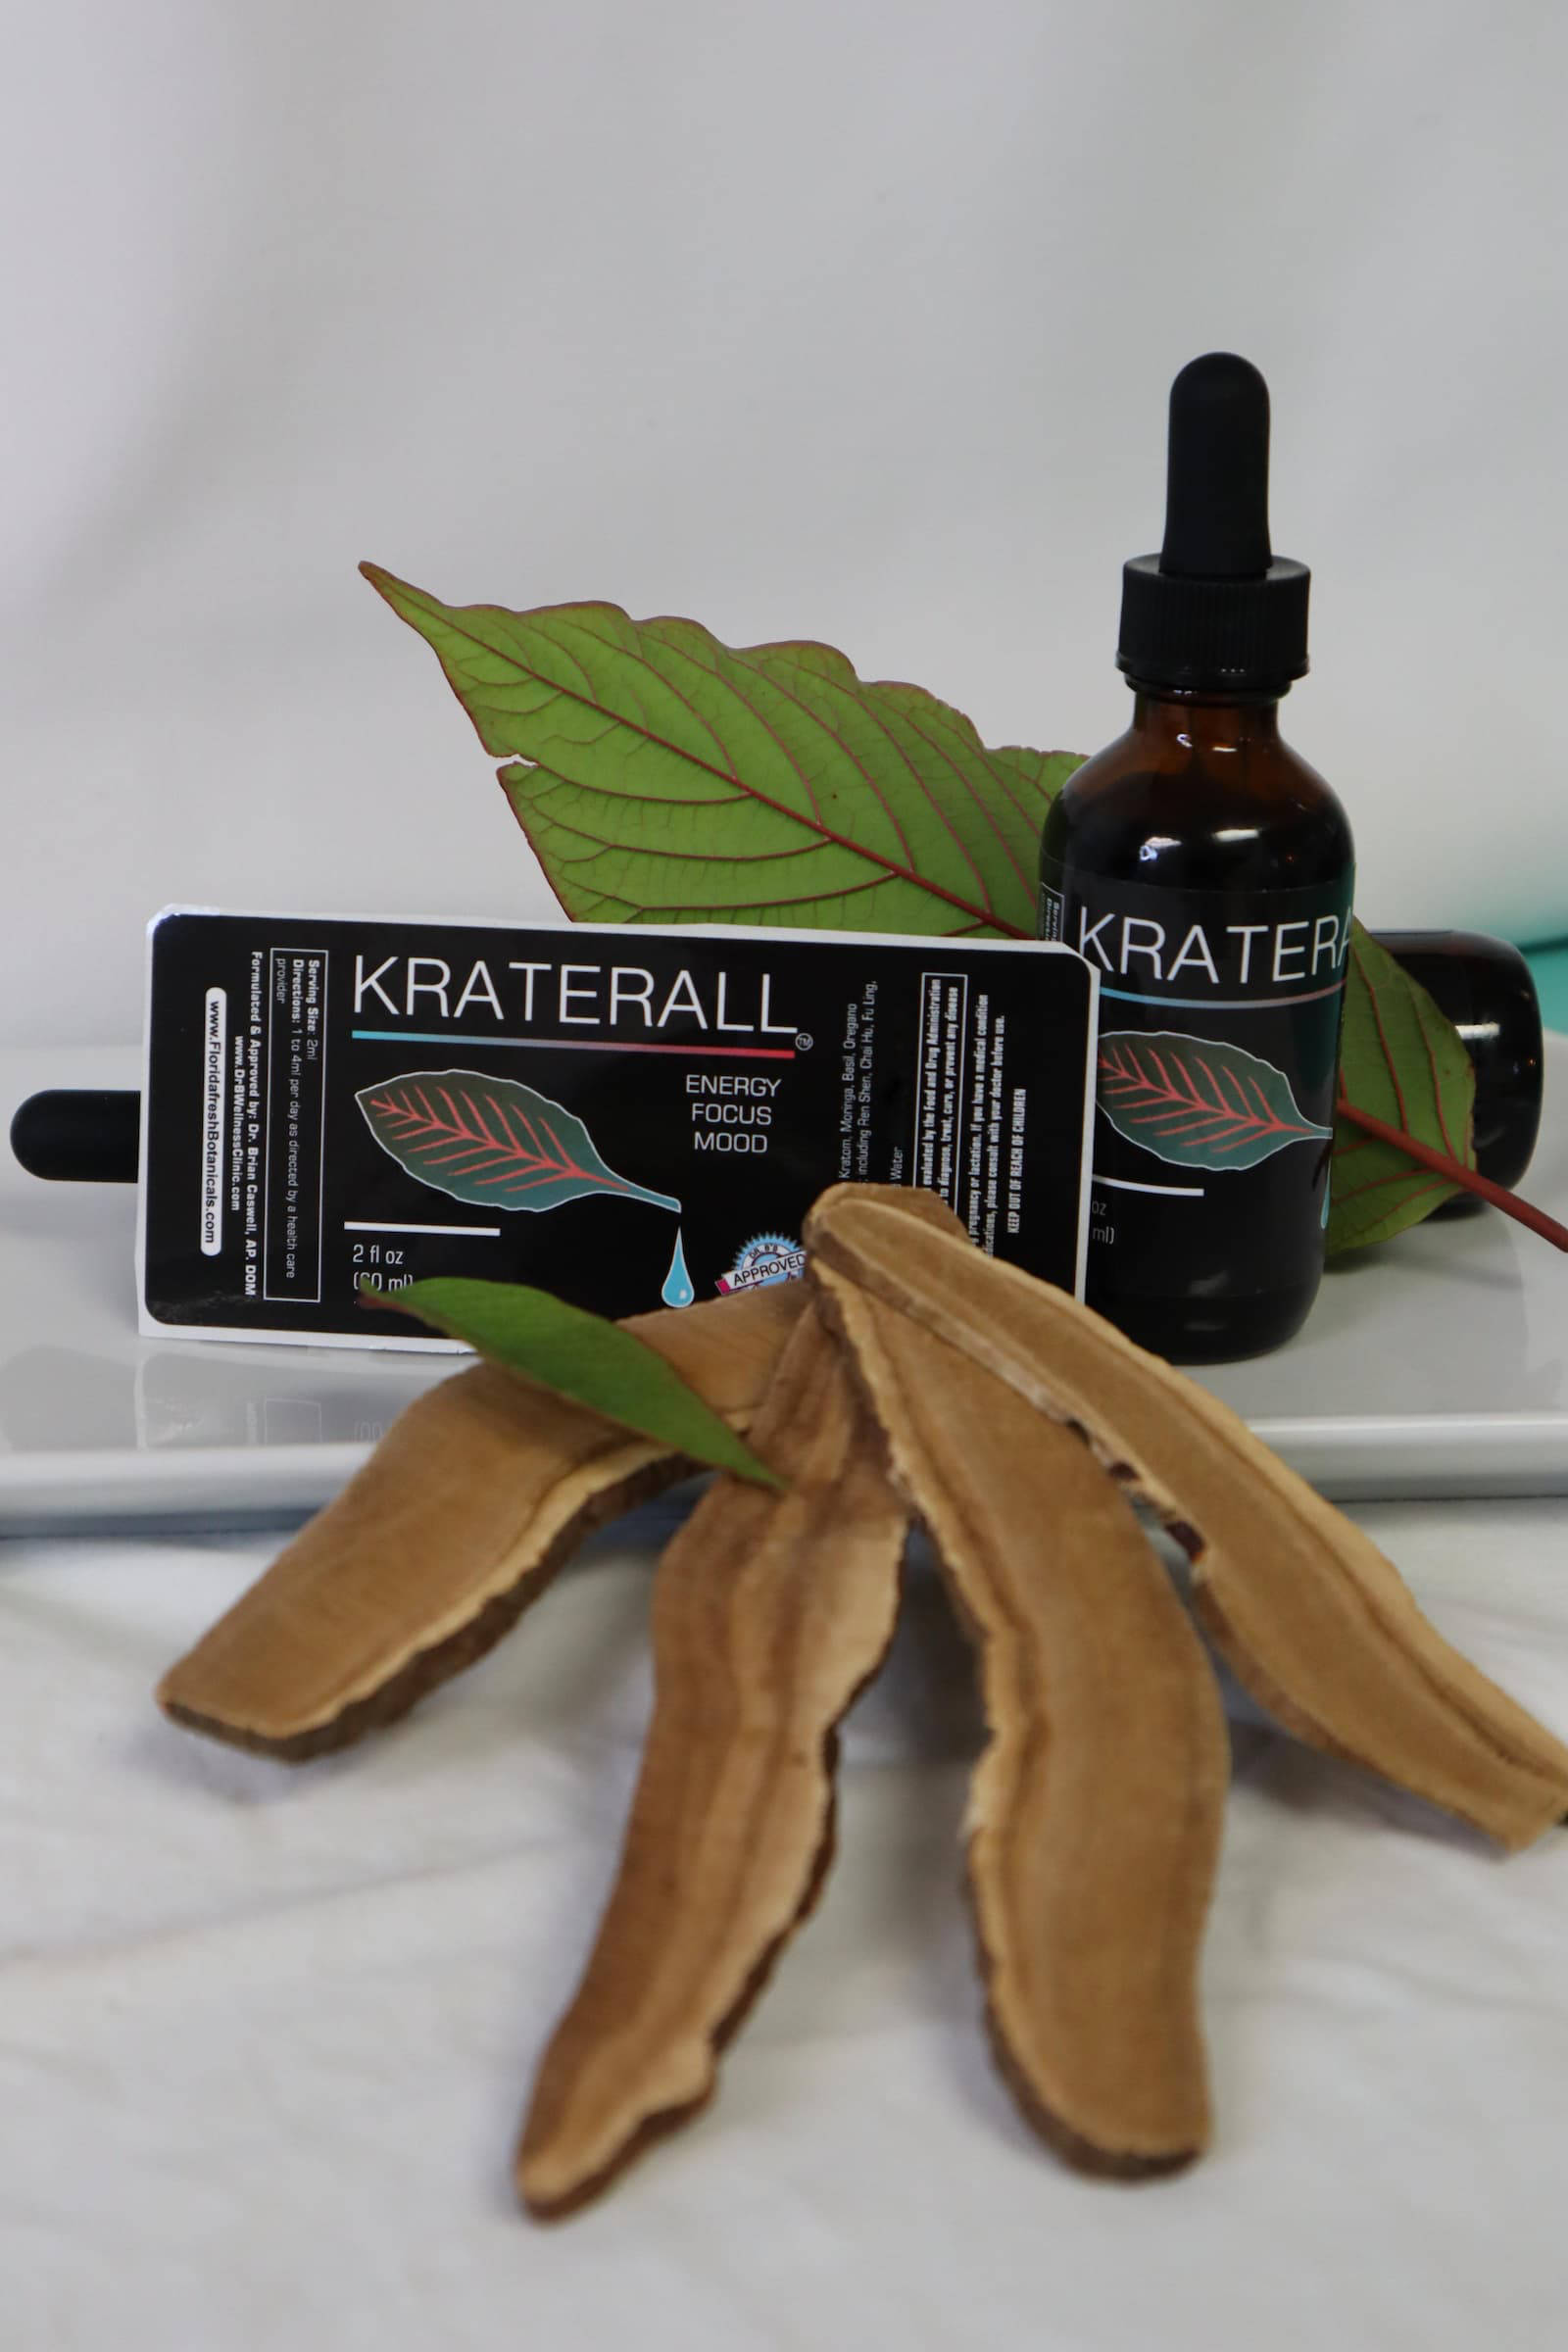 Kraterall with leaves